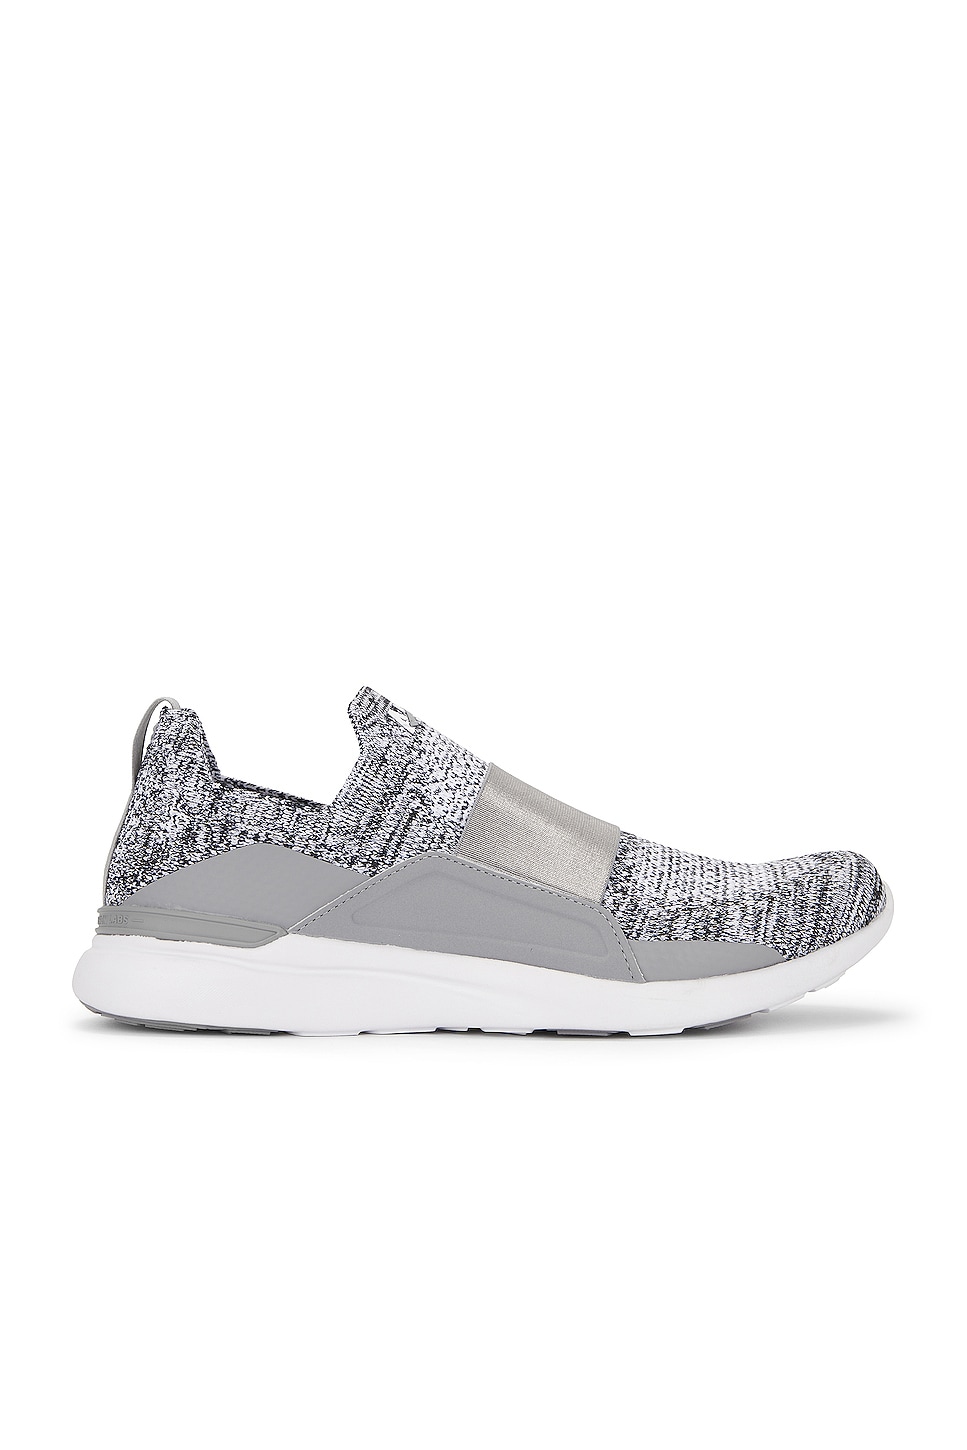 Image 1 of APL: Athletic Propulsion Labs Techloom Bliss Sneaker in Heather Grey & White